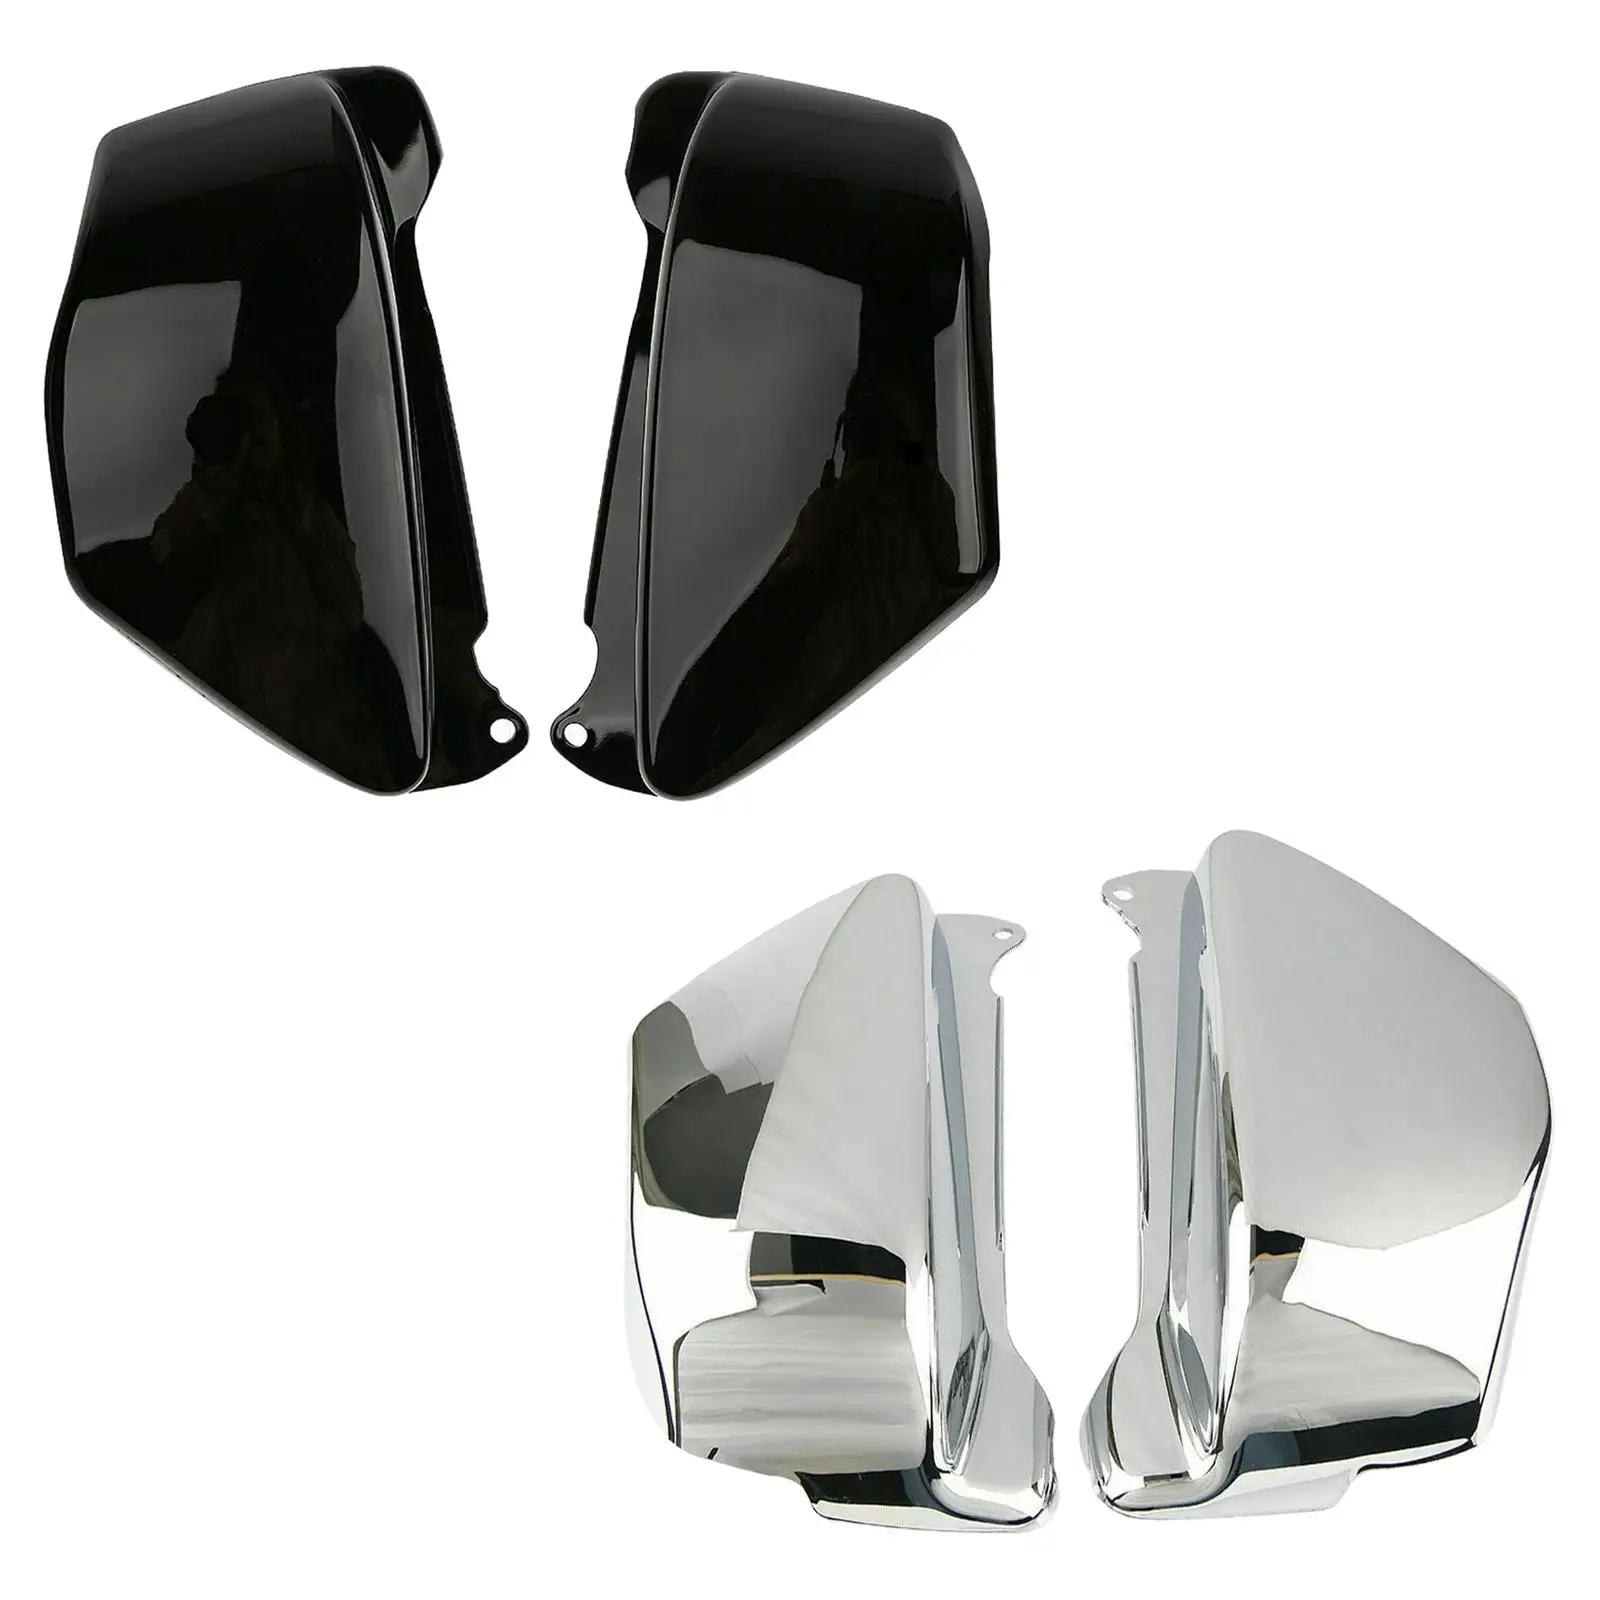 

2Pcs Motorcycle Chrome Battery Side Fairing Cover Protector Fit for Vf750